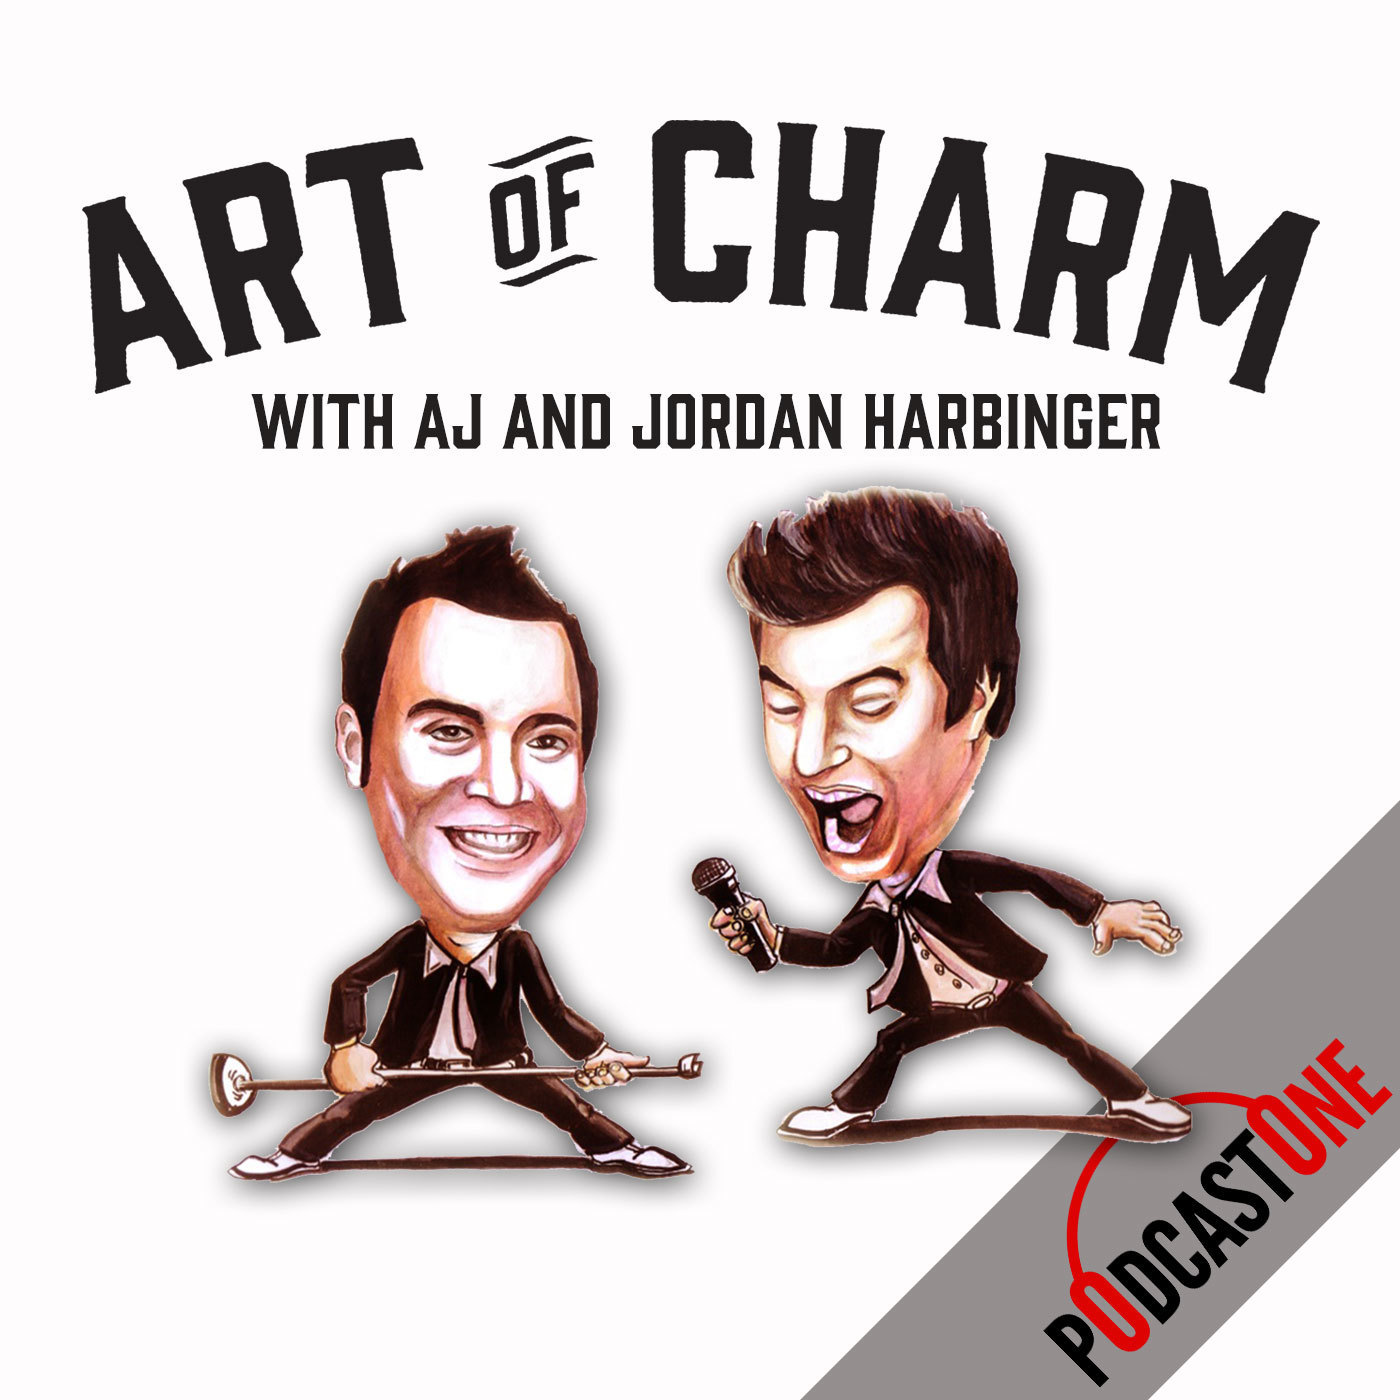 The Art of Charm